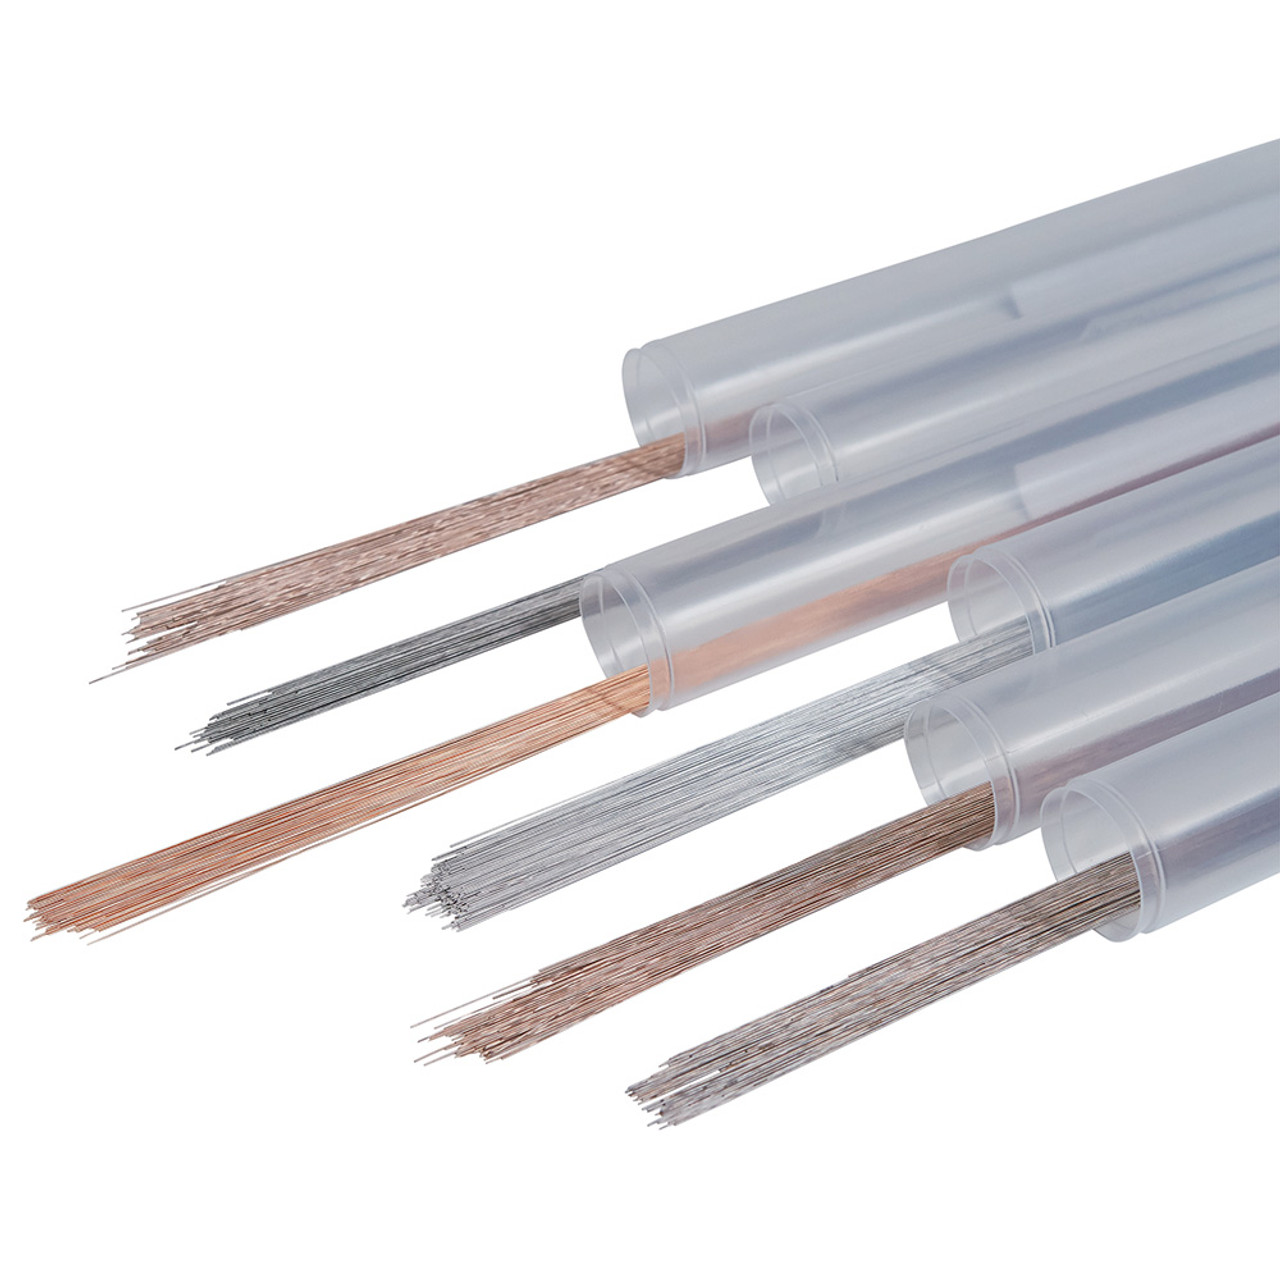 Laser Welding Wires - SS-420,0.3mm pkg. of 25 grams = approx. 141 wires